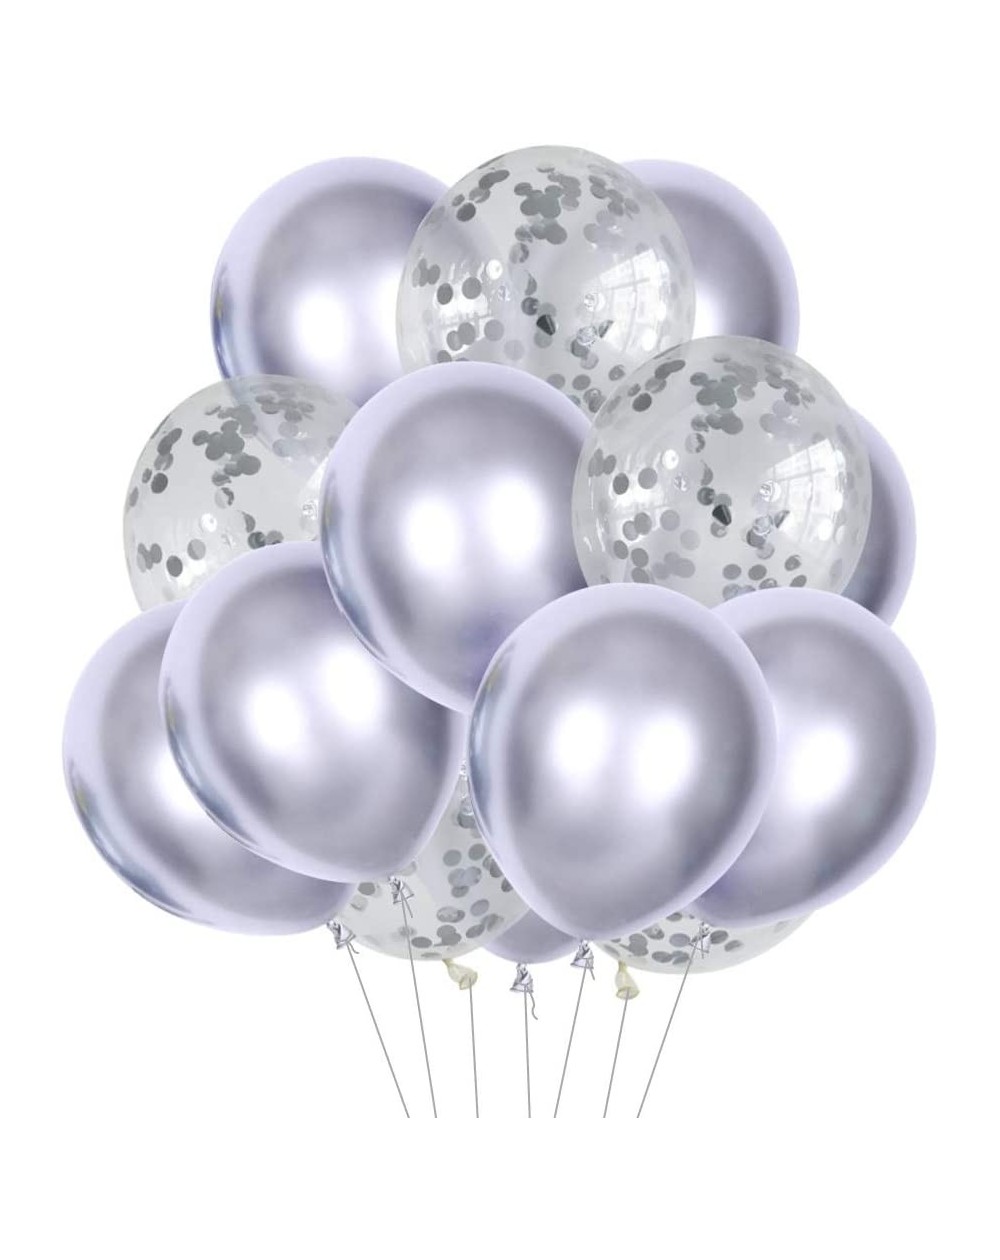 Balloons 80 pcs 12inch Silvery Confetti Balloons and Silvery Chrome Shiny Metallic Latex Balloons for Wedding Party Baby Show...